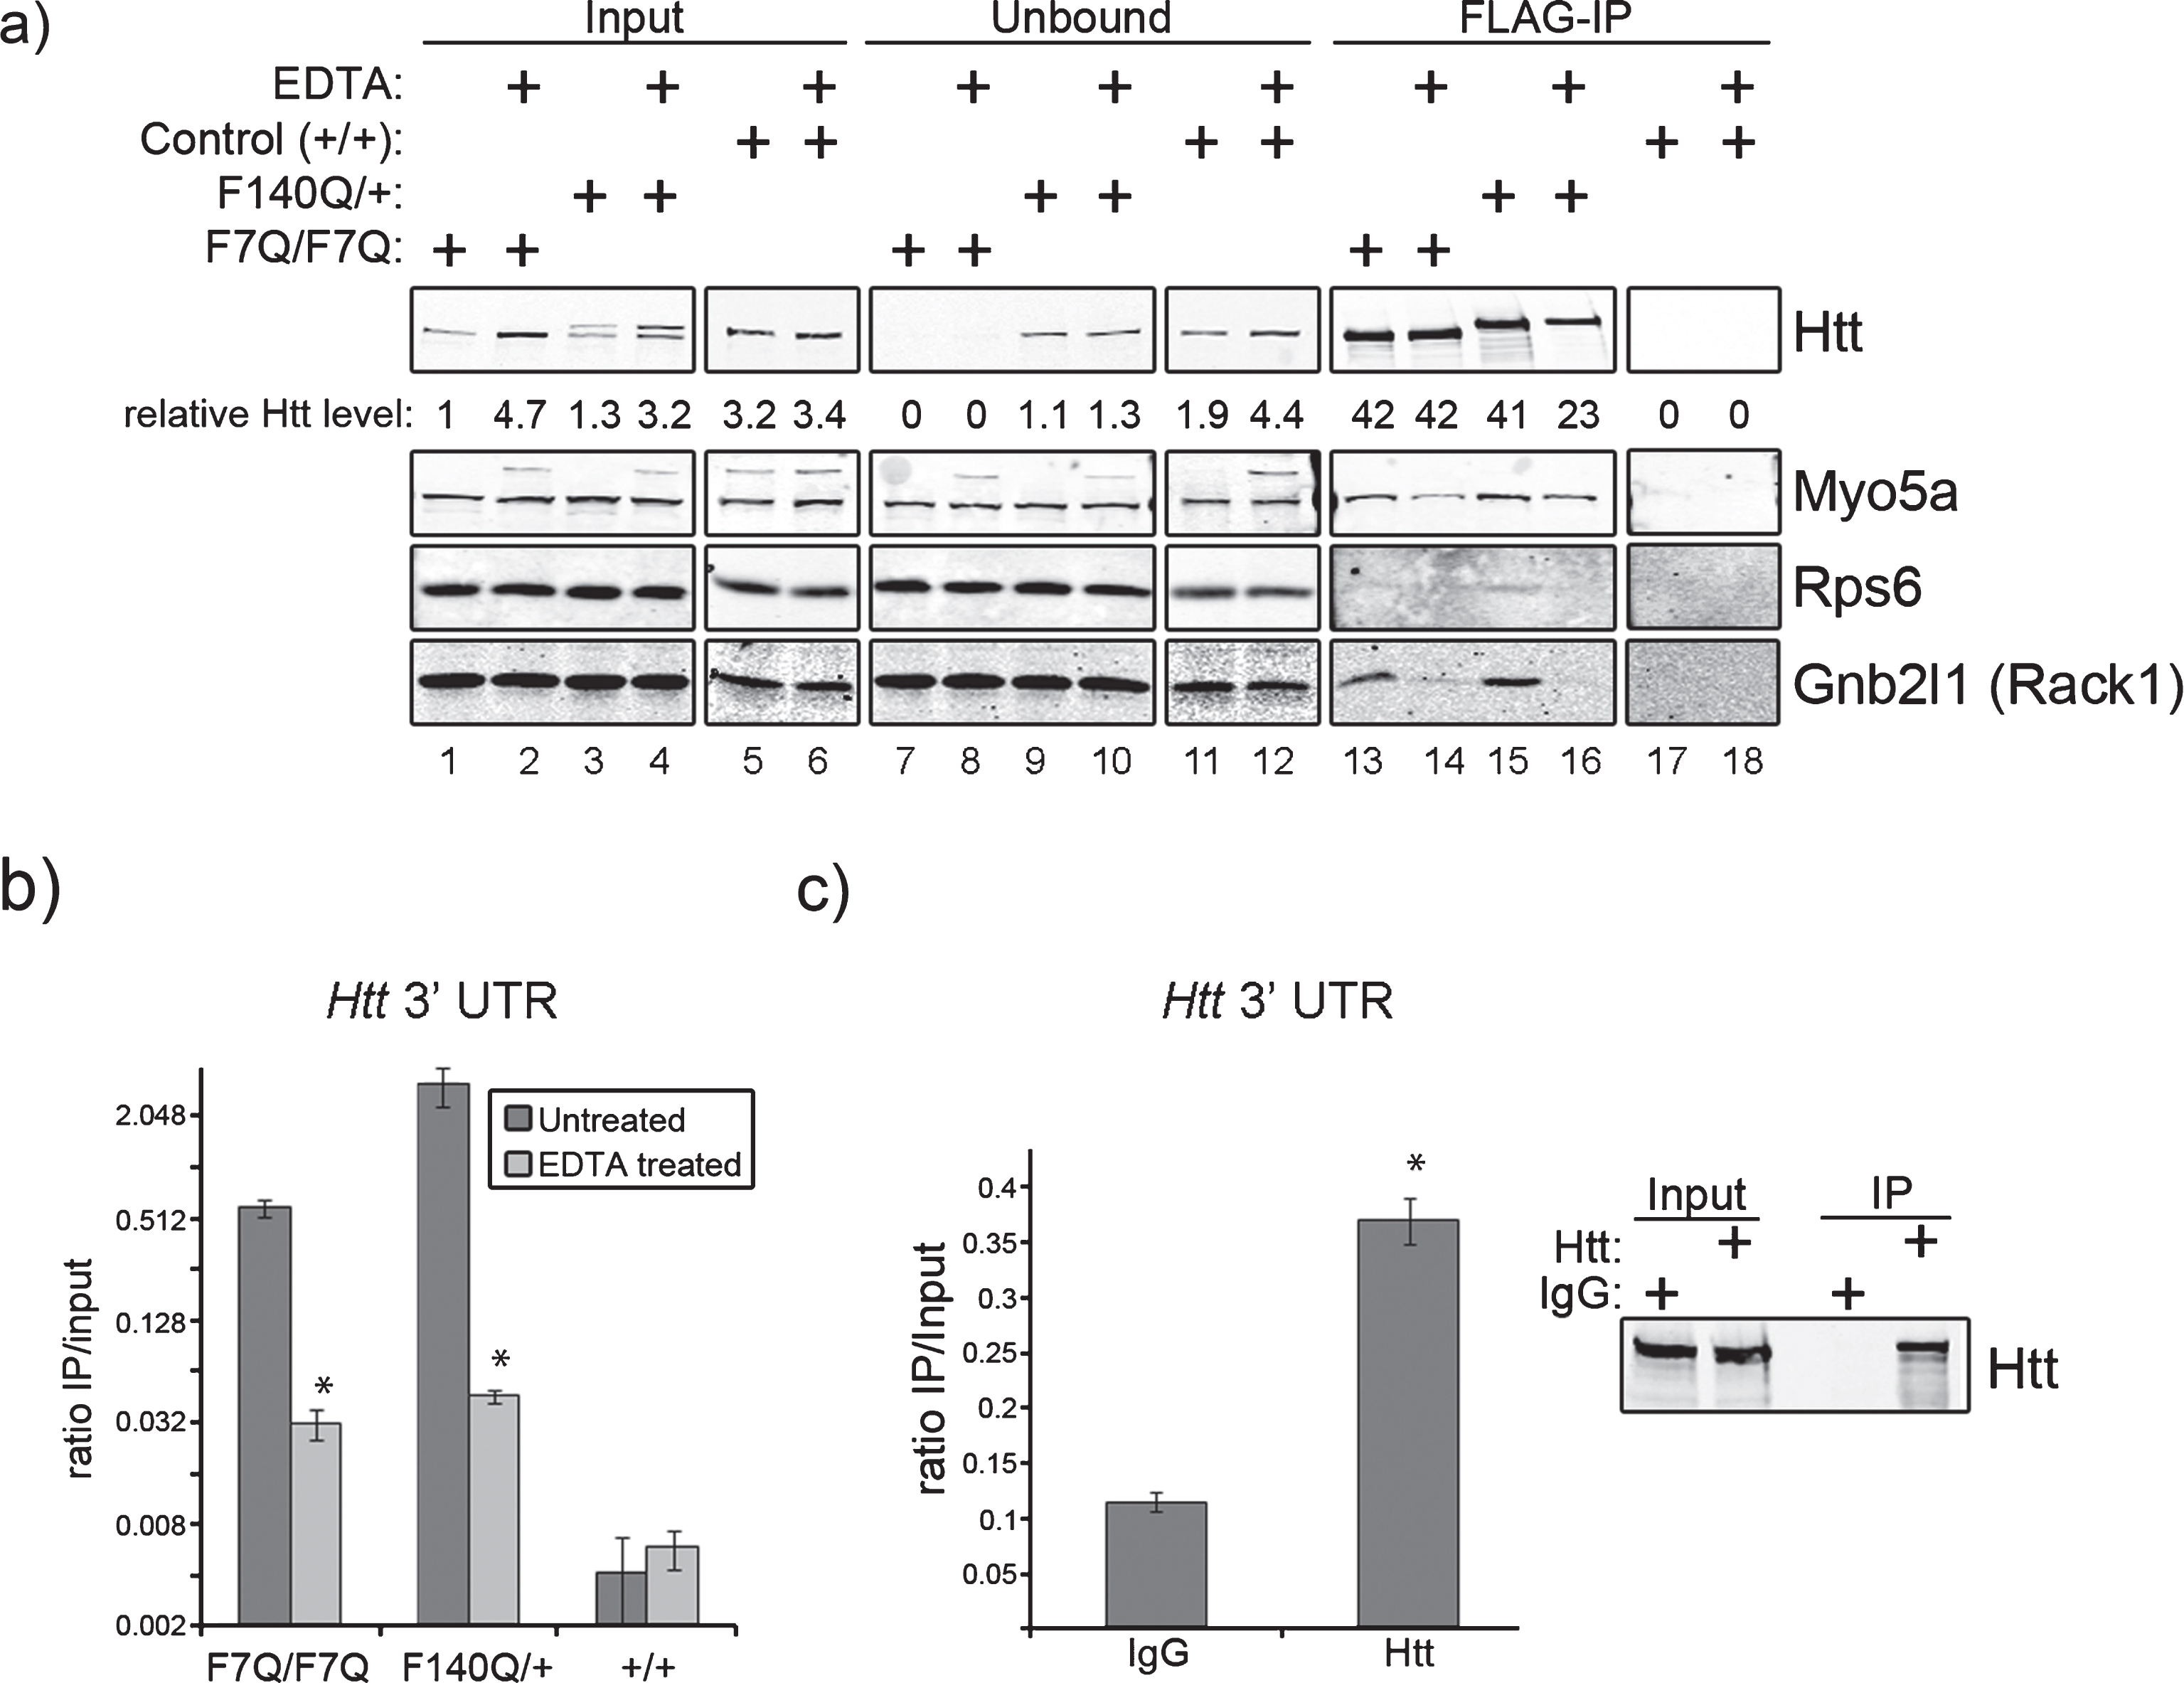 Wild type and mutant Htt proteins 
associate with Htt mRNA. a) Htt association with ribosomal proteins depends on the presence of intact 
ribosomes. Western blots of input, unbound, and FLAG-immunoprecipitated proteins from negative control (Control), 
3xFLAG7Q/3xFLAG7Q (F7Q/F7Q), and 3xFLAG140Q/+(F140Q/+) total cytoplasmic lysates with or without 20 mM EDTA 
pre-treatment. 20% of total immunoprecipitated protein was loaded for Htt blot and 80% for other blots. The 
numbers below indicate the amount of Htt in each lane relative to the amount of Htt present in 30μg 
F7Q/F7Q inputs. b) Htt mRNA is substantially enriched in FLAG-Htt affinity purifications. The graph shows 
quantification of RT-qPCR data for indicated samples relative to the amount of Htt mRNA present in 
1μg of total RNA from input samples. RT-qPCR was performed with primers specific to the Htt 
3’ UTR. *P <  0.05, t-test c) Htt immunoprecipitation recovers more Htt mRNA than IgG control immunoprecipitations. Western blot shows that Htt immunoprecipitation pulls out 
Htt from a Neuro2a cell lysate while the IgG negative control does not. The graph shows the relative enrichment 
of Htt 3’ UTR in negative control (IgG) and Htt immunoprecipitation compared with 1μg of 
total RNA from the input. *P <  0.05, t-test.